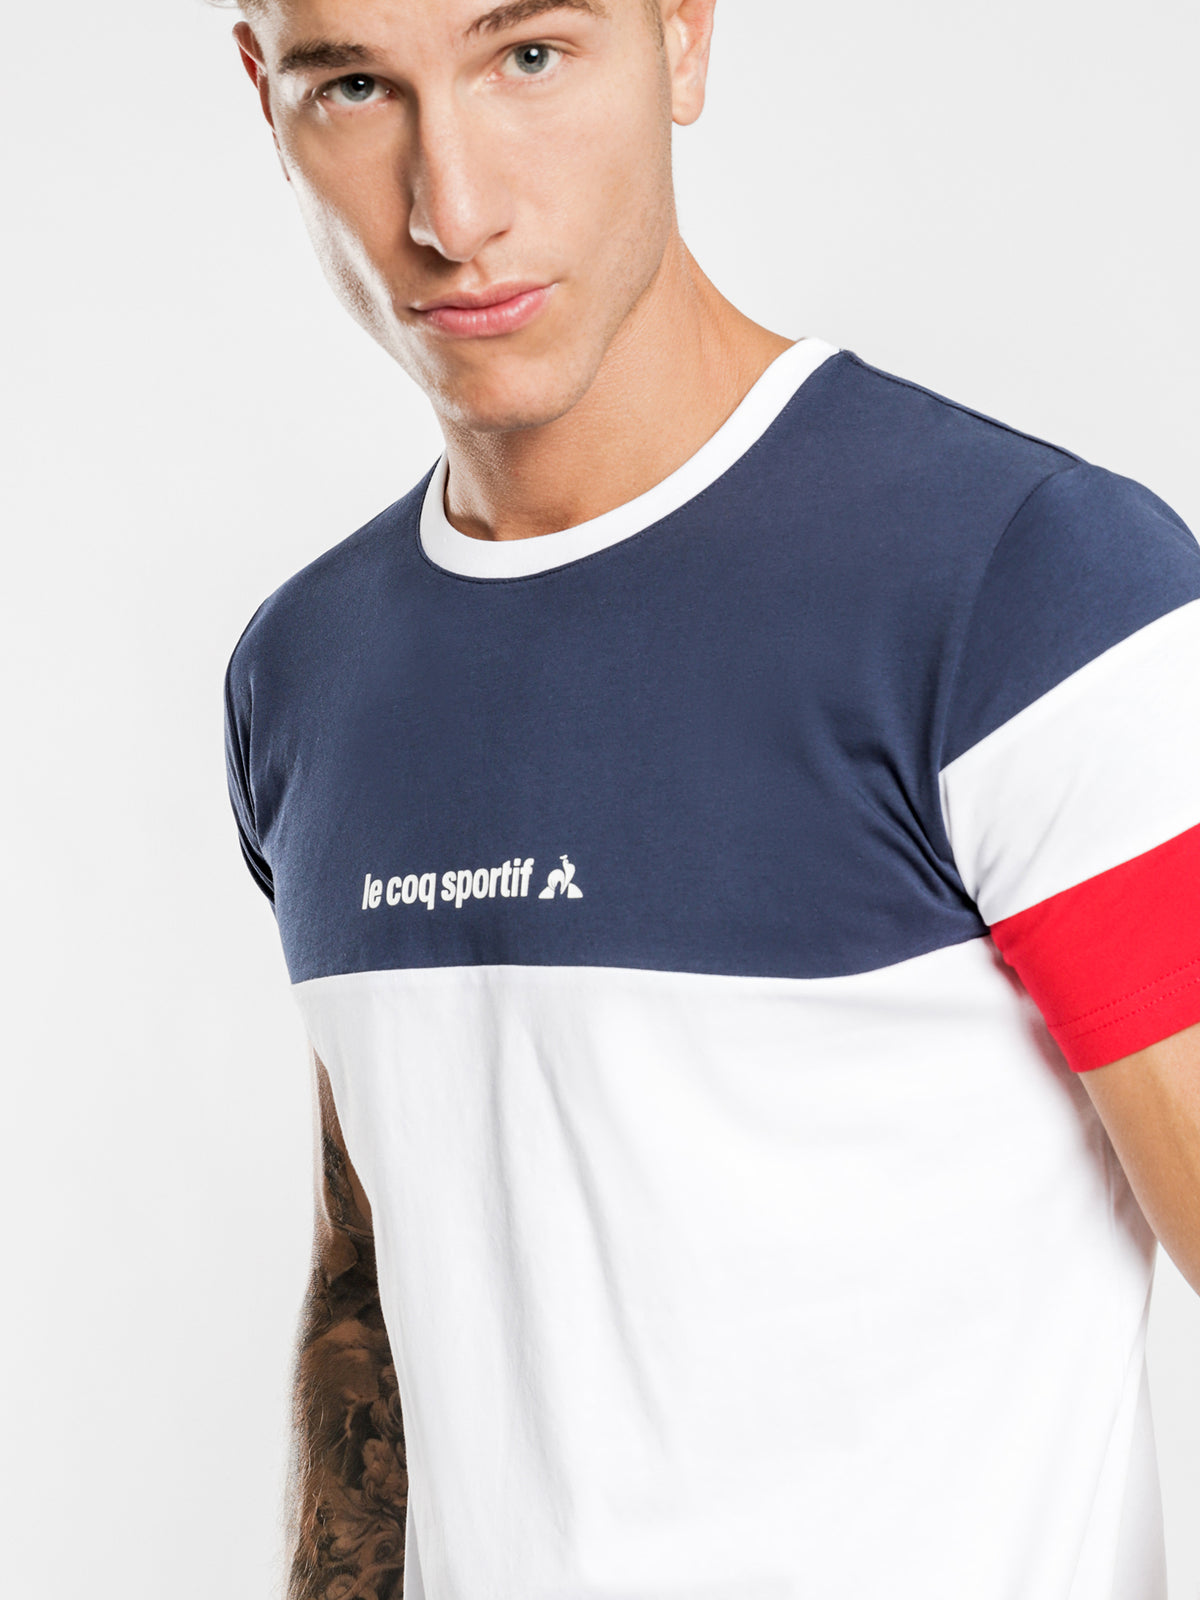 Tricolore T-Shirt in Navy White &amp; Red